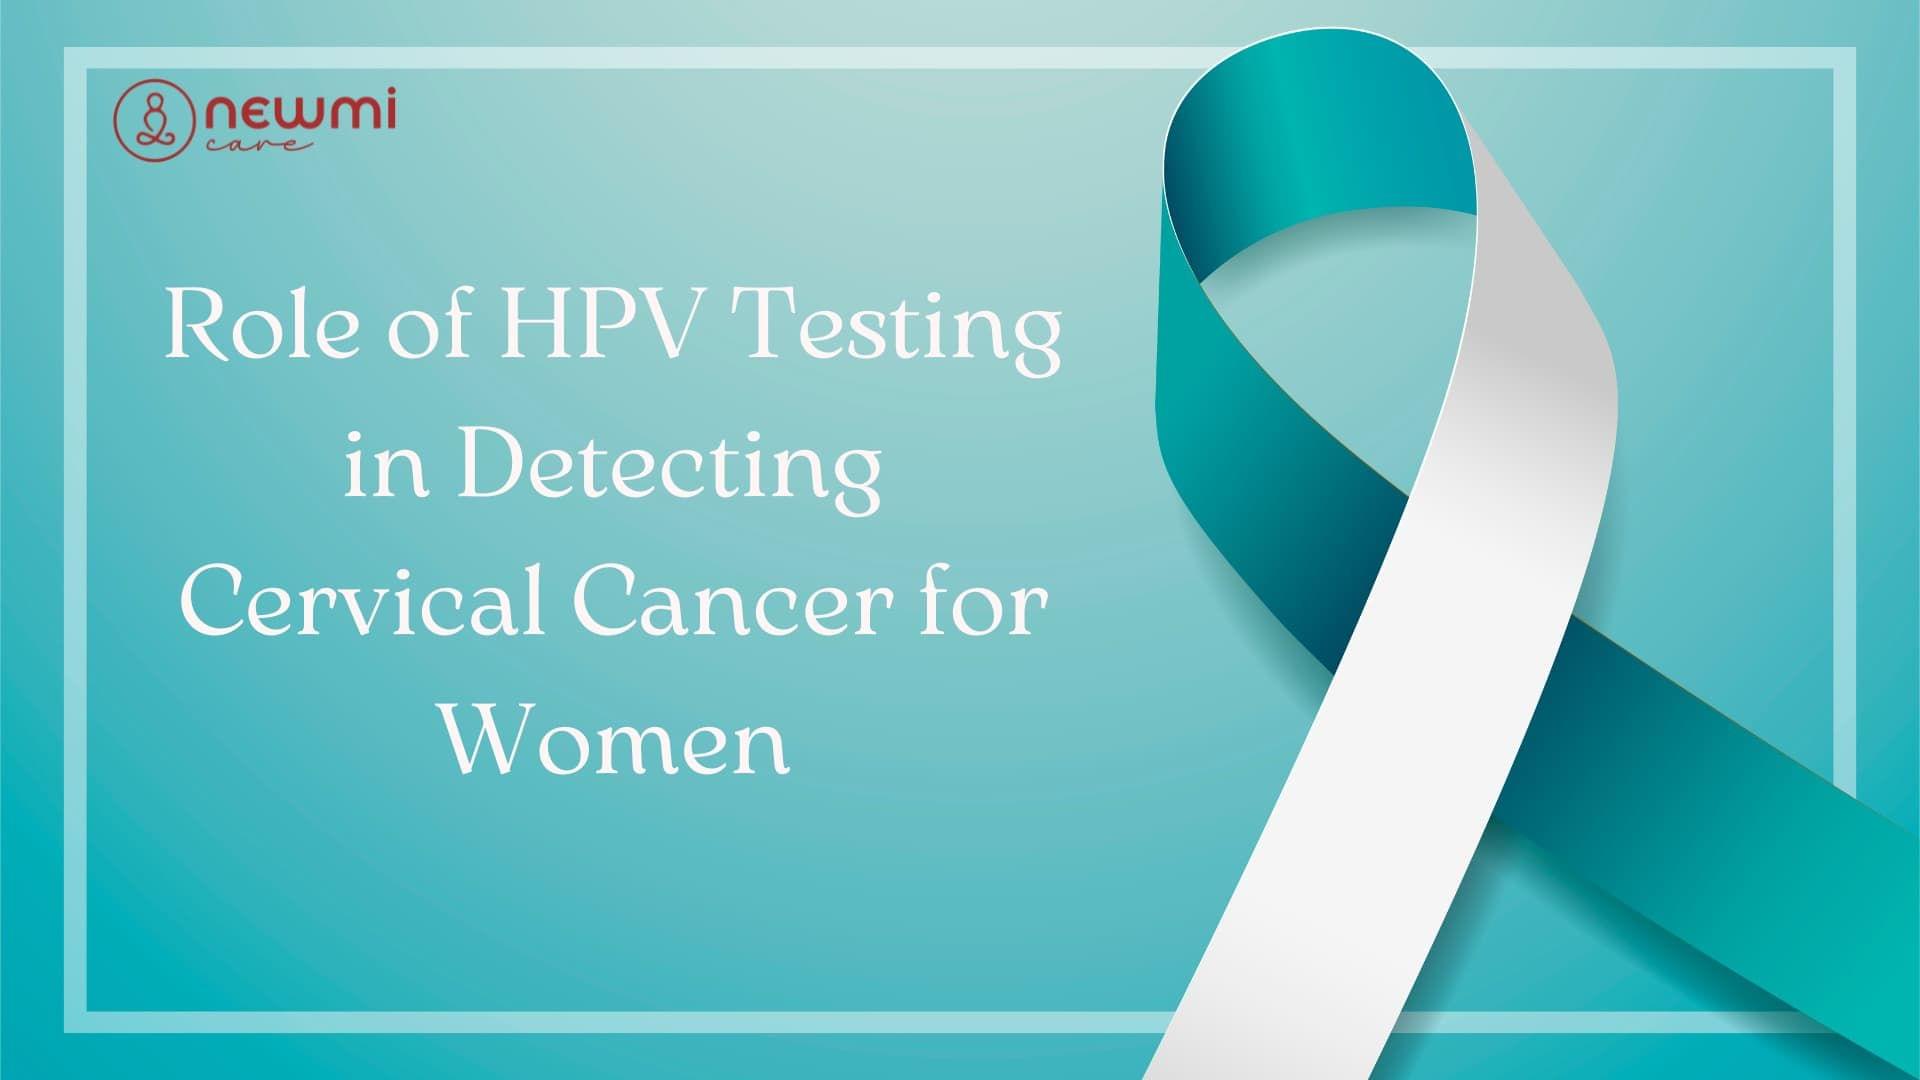 Role of HPV Testing in Detecting Cervical Cancer for Women